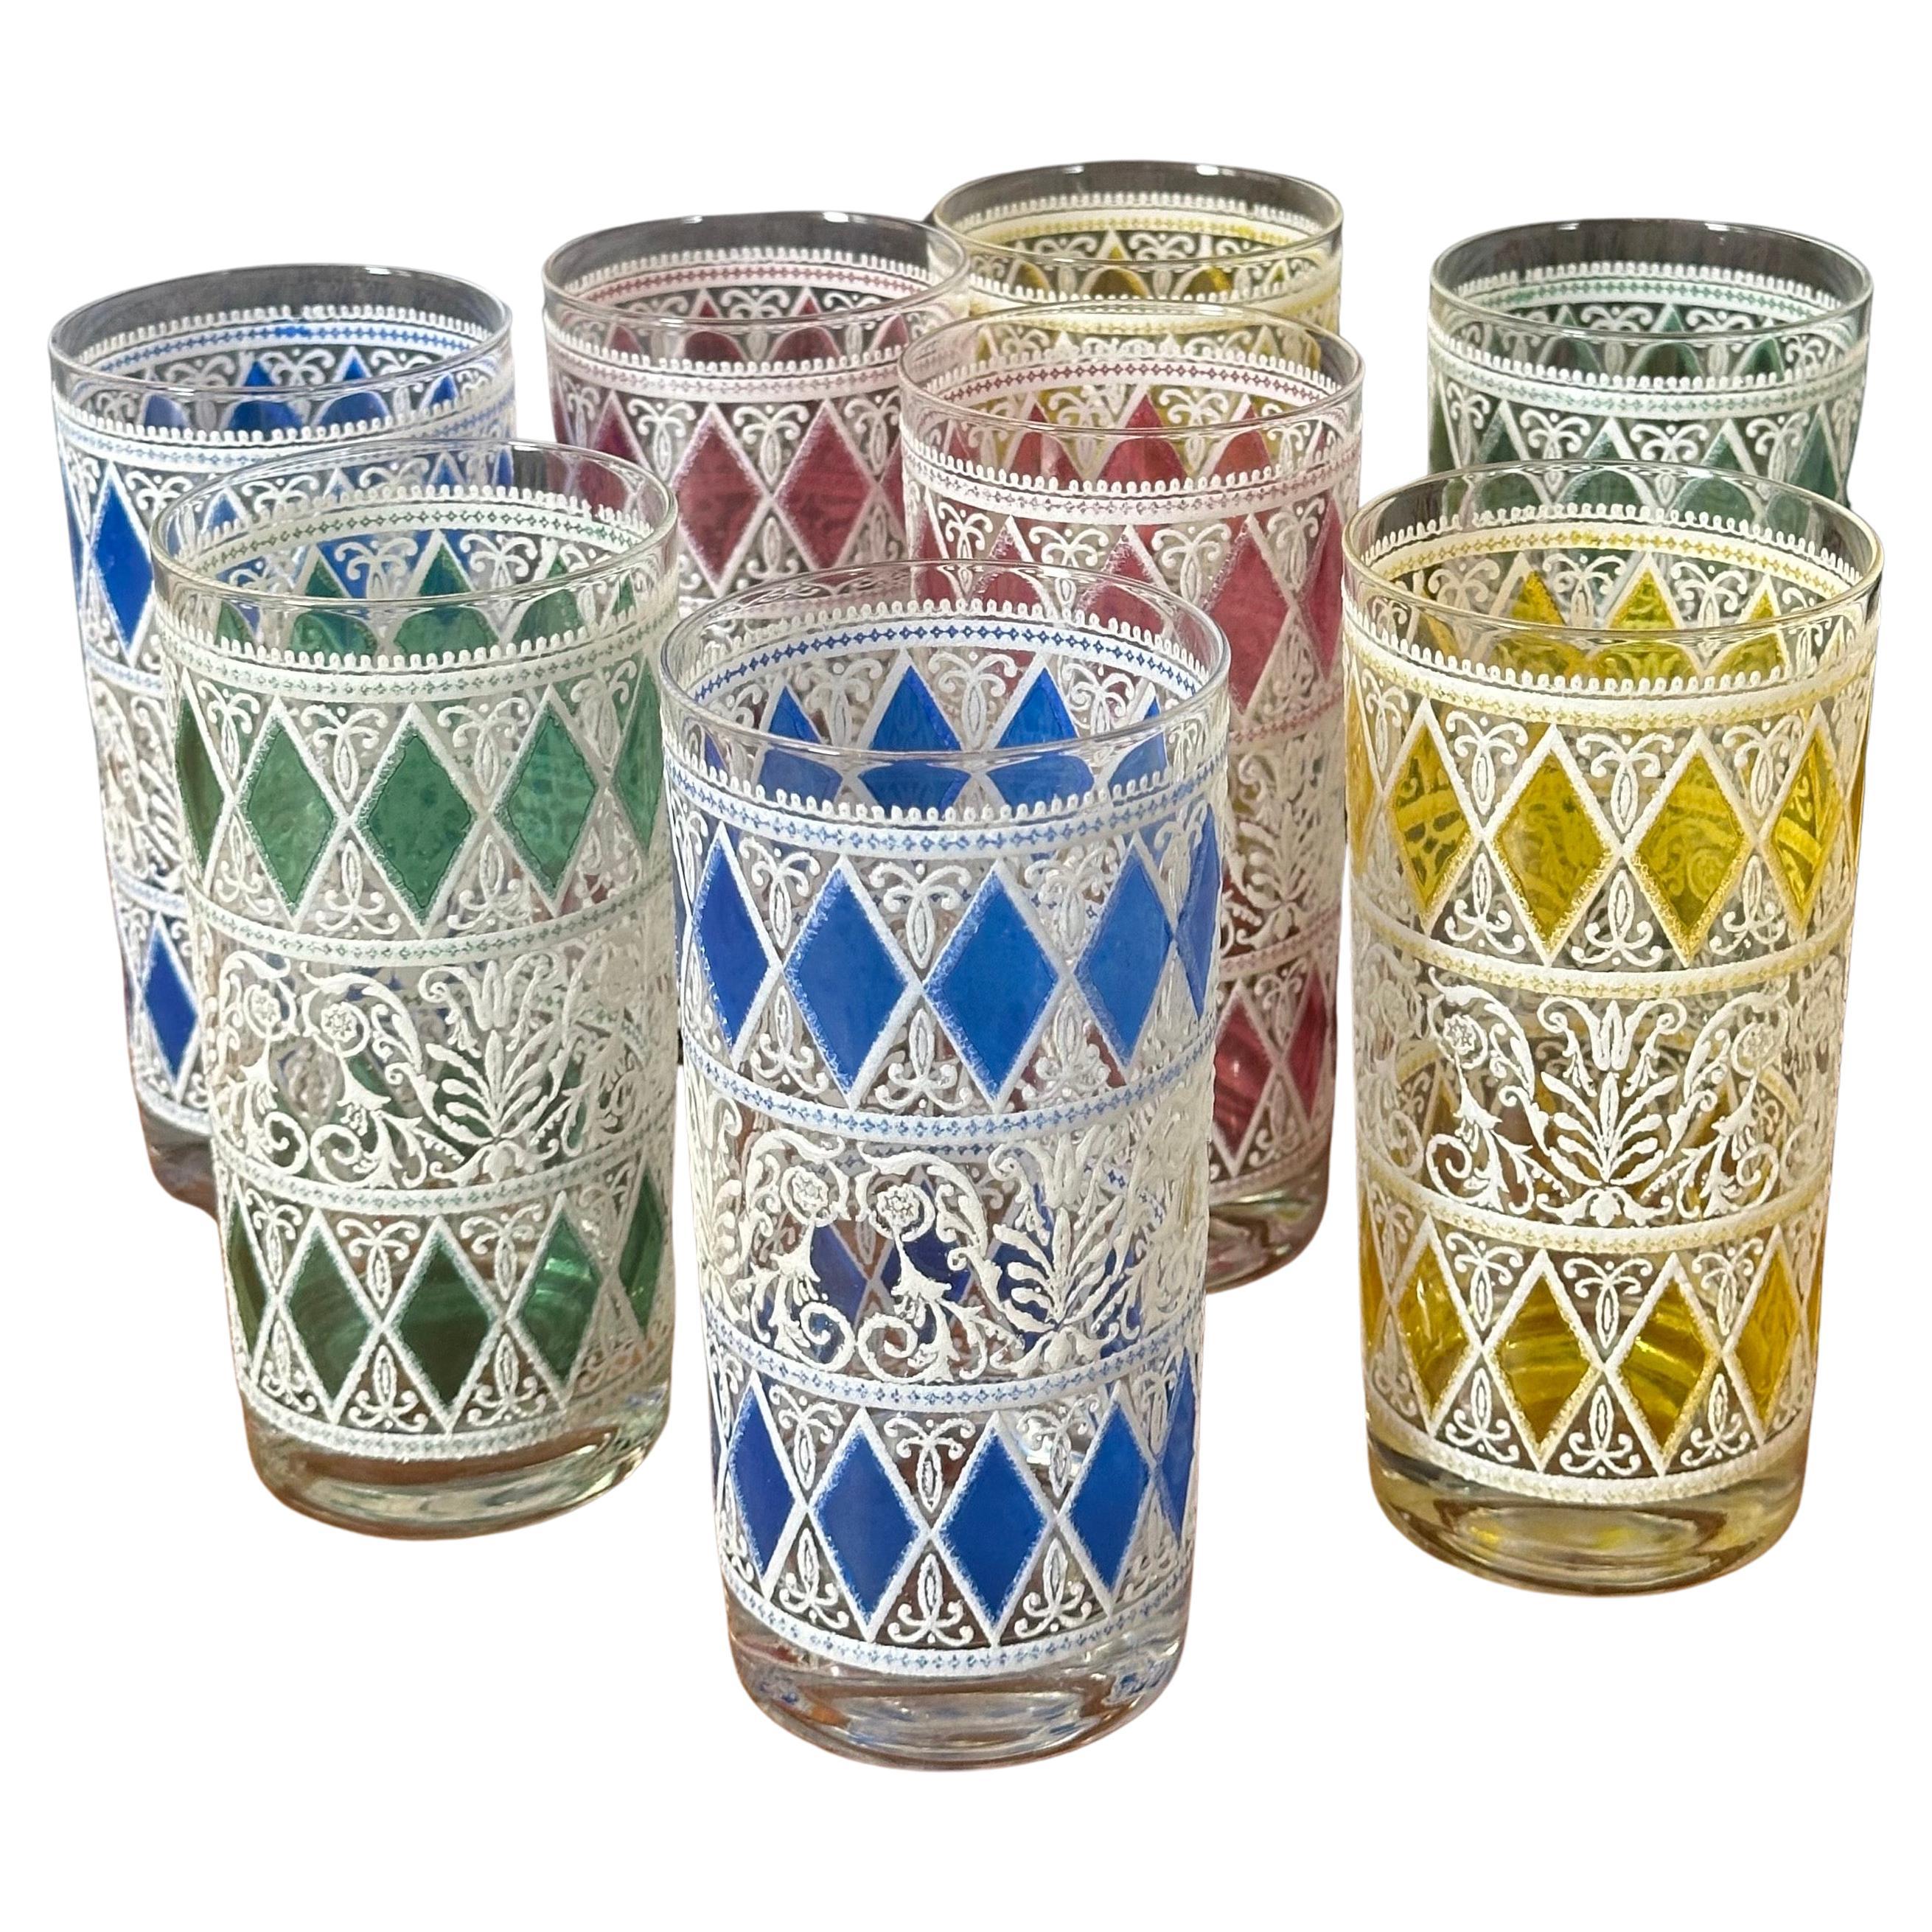 Great set of eight vintage enamelware high ball glasses, circa 1950s.  These glasses are very difficult to find in a set and are in very good condition with no cracks or chips and crisp enamel design.  Each glass stands approximately 5.625